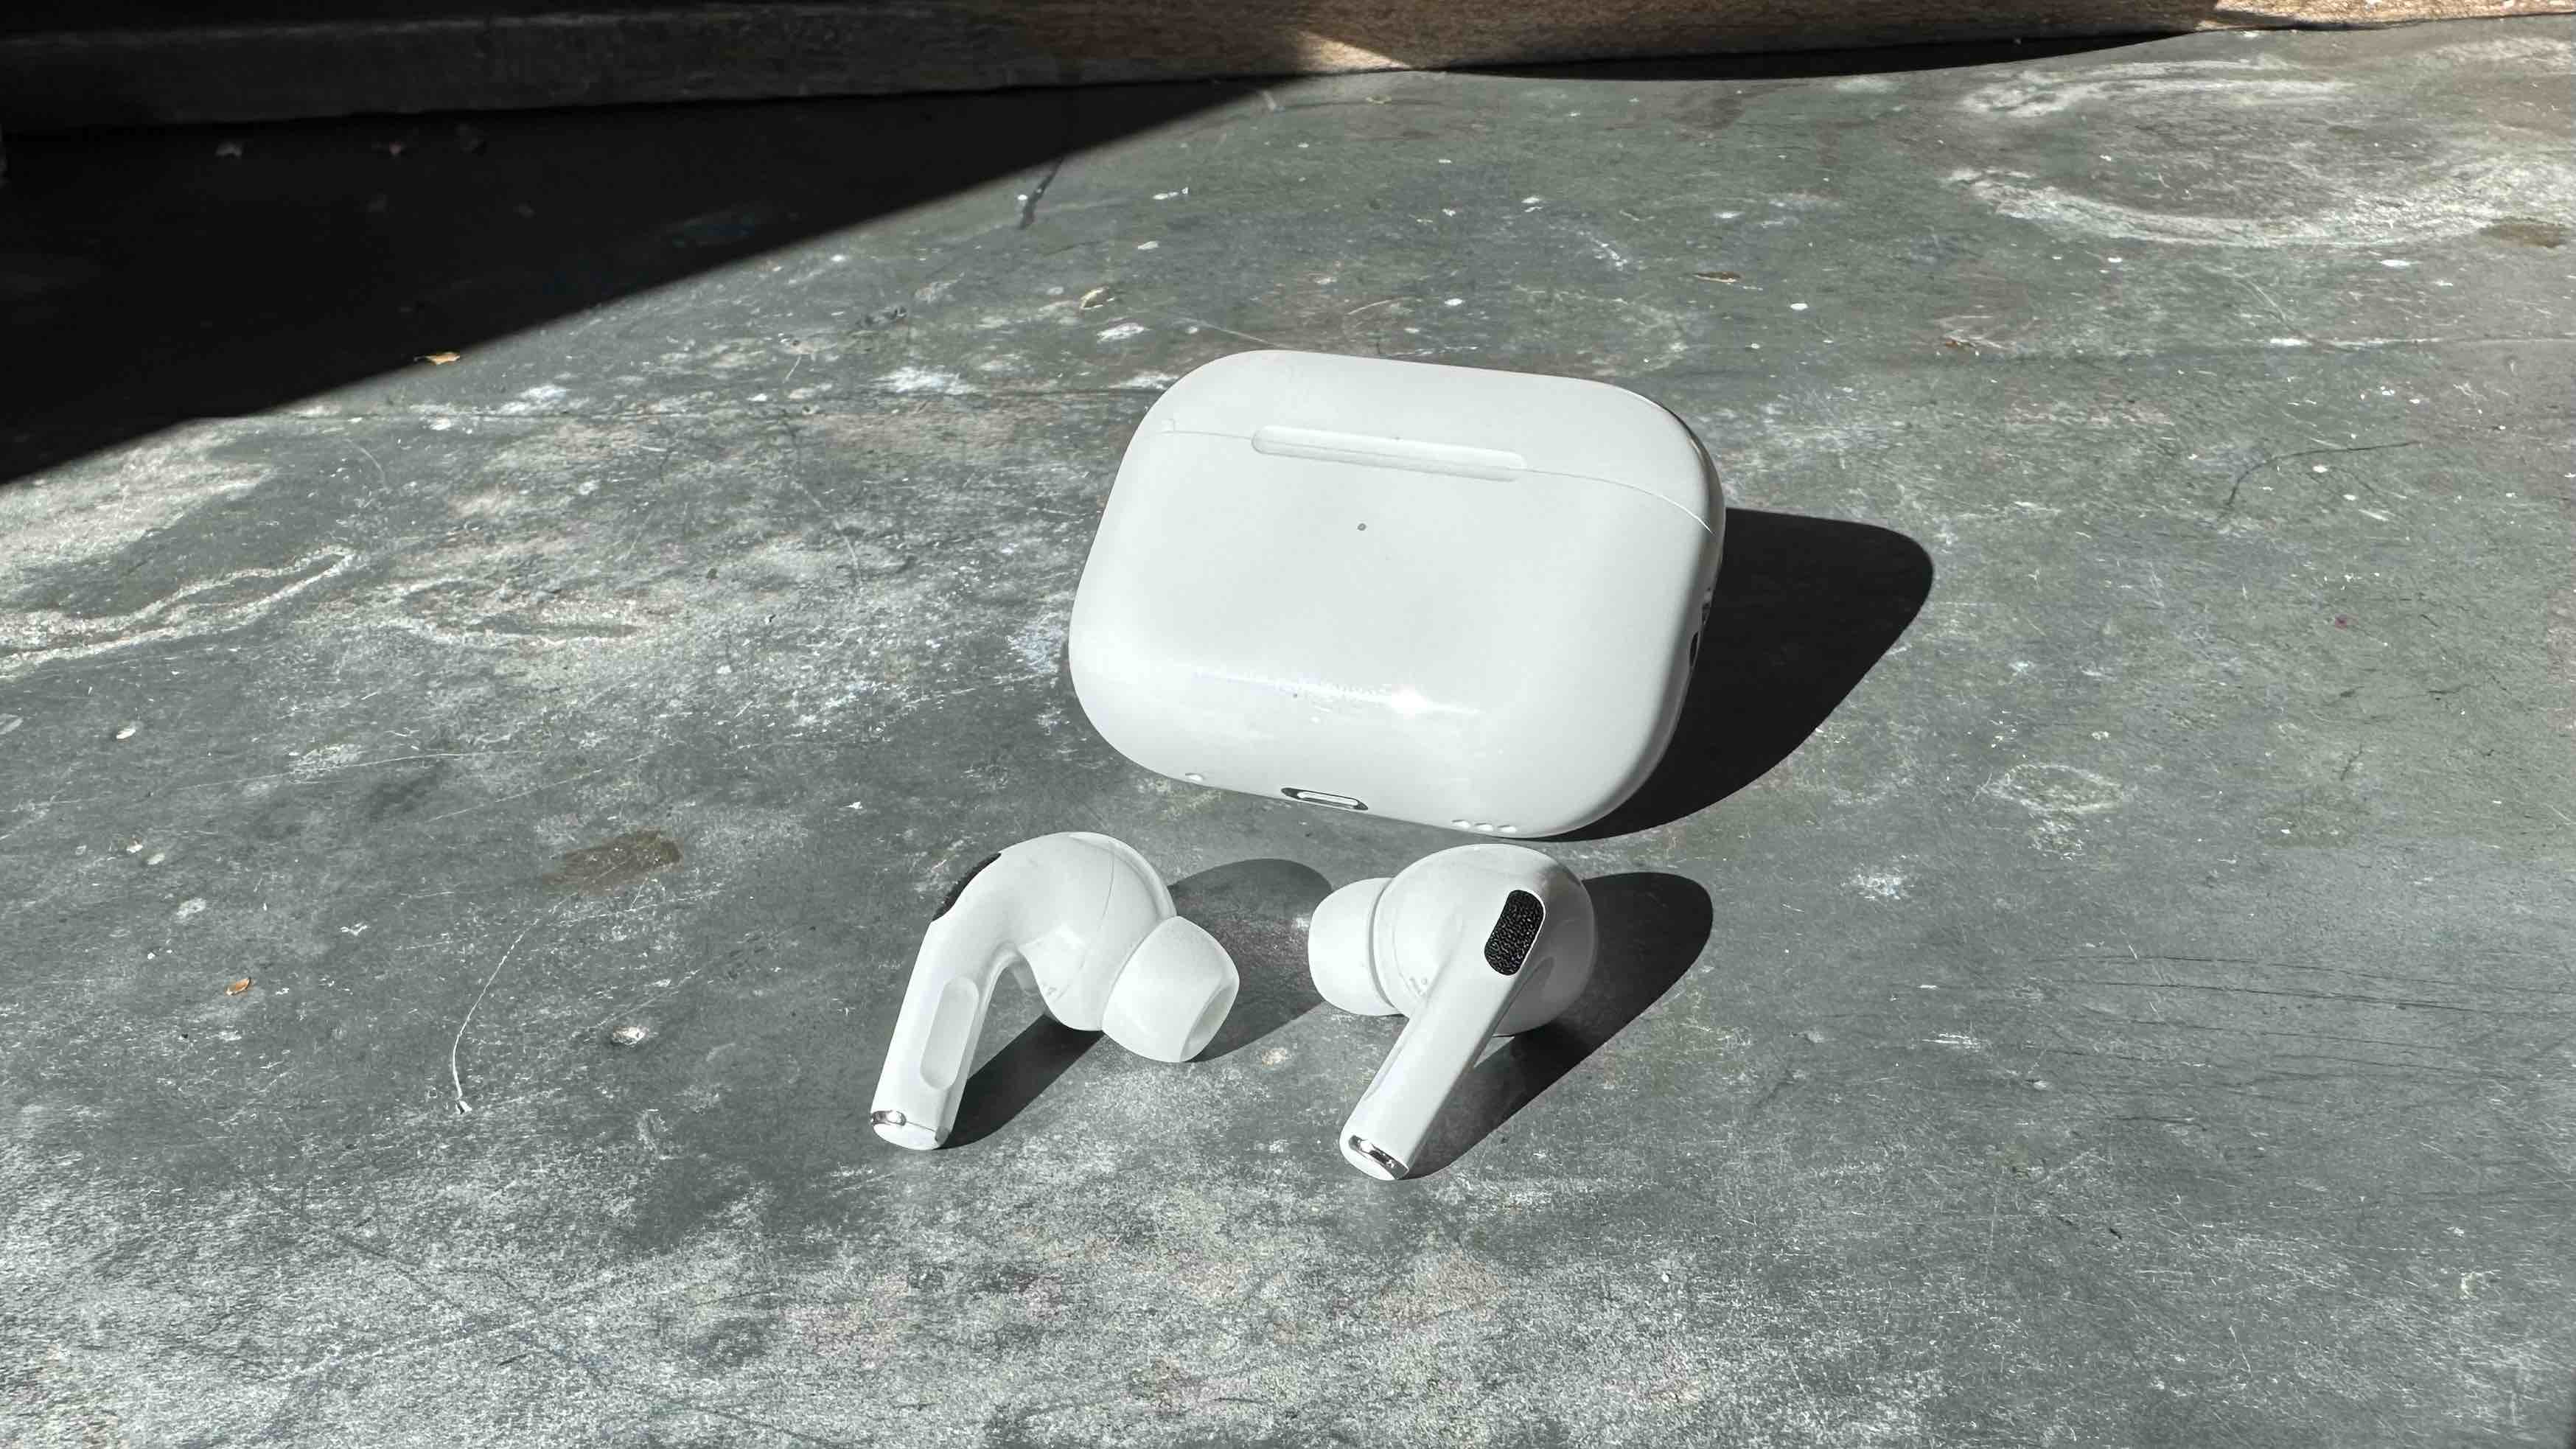 Cleaning the AirPods Pro charging case